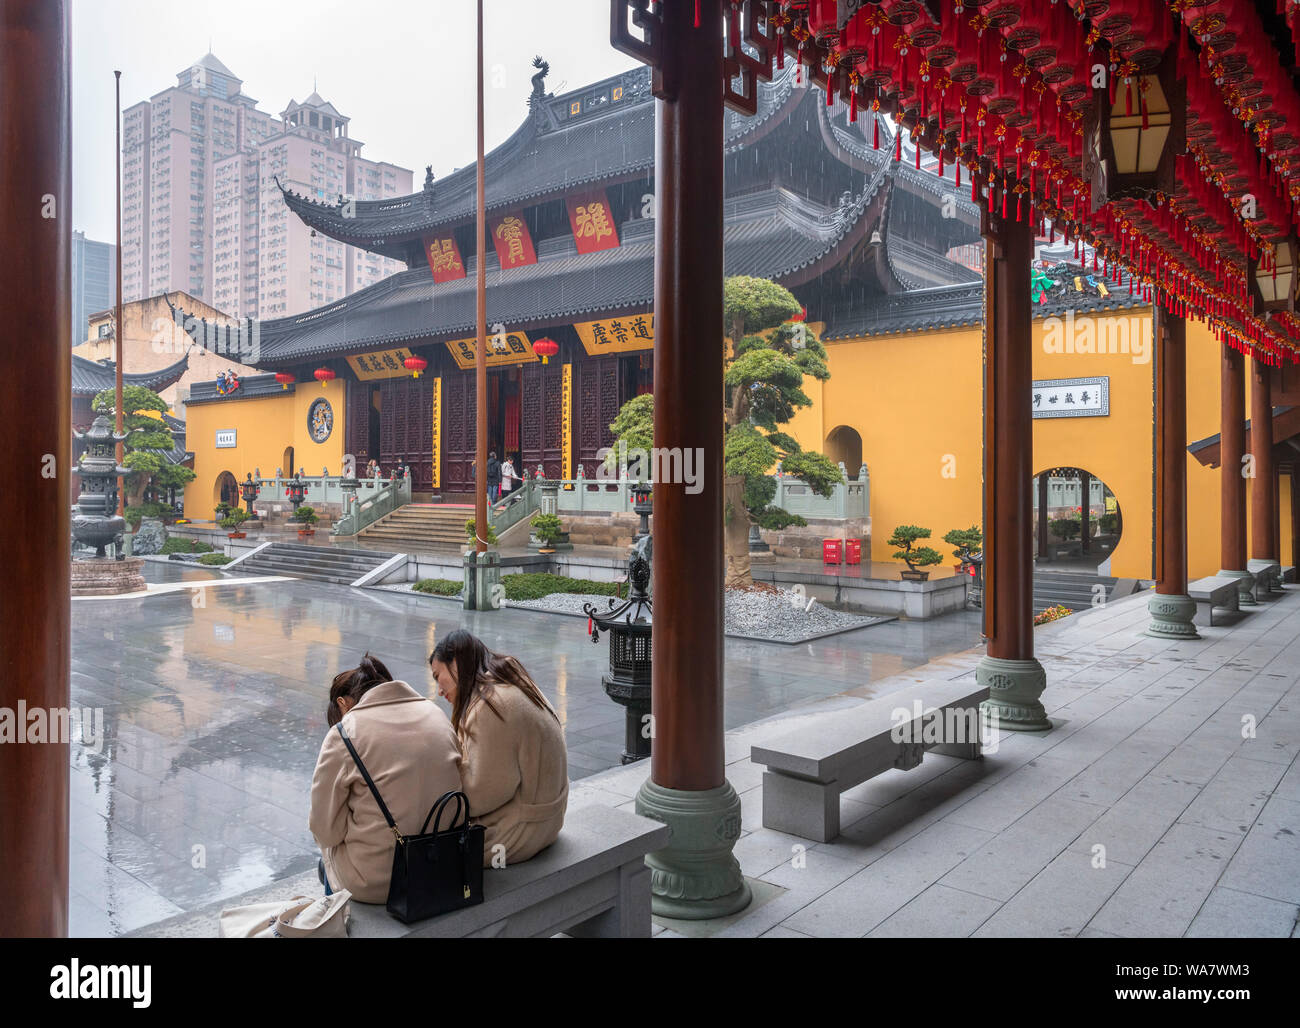 Two young women sheltering from the rain in front of the Grand Hall at the Jade Buddha Temple, Shanghai, China Stock Photo